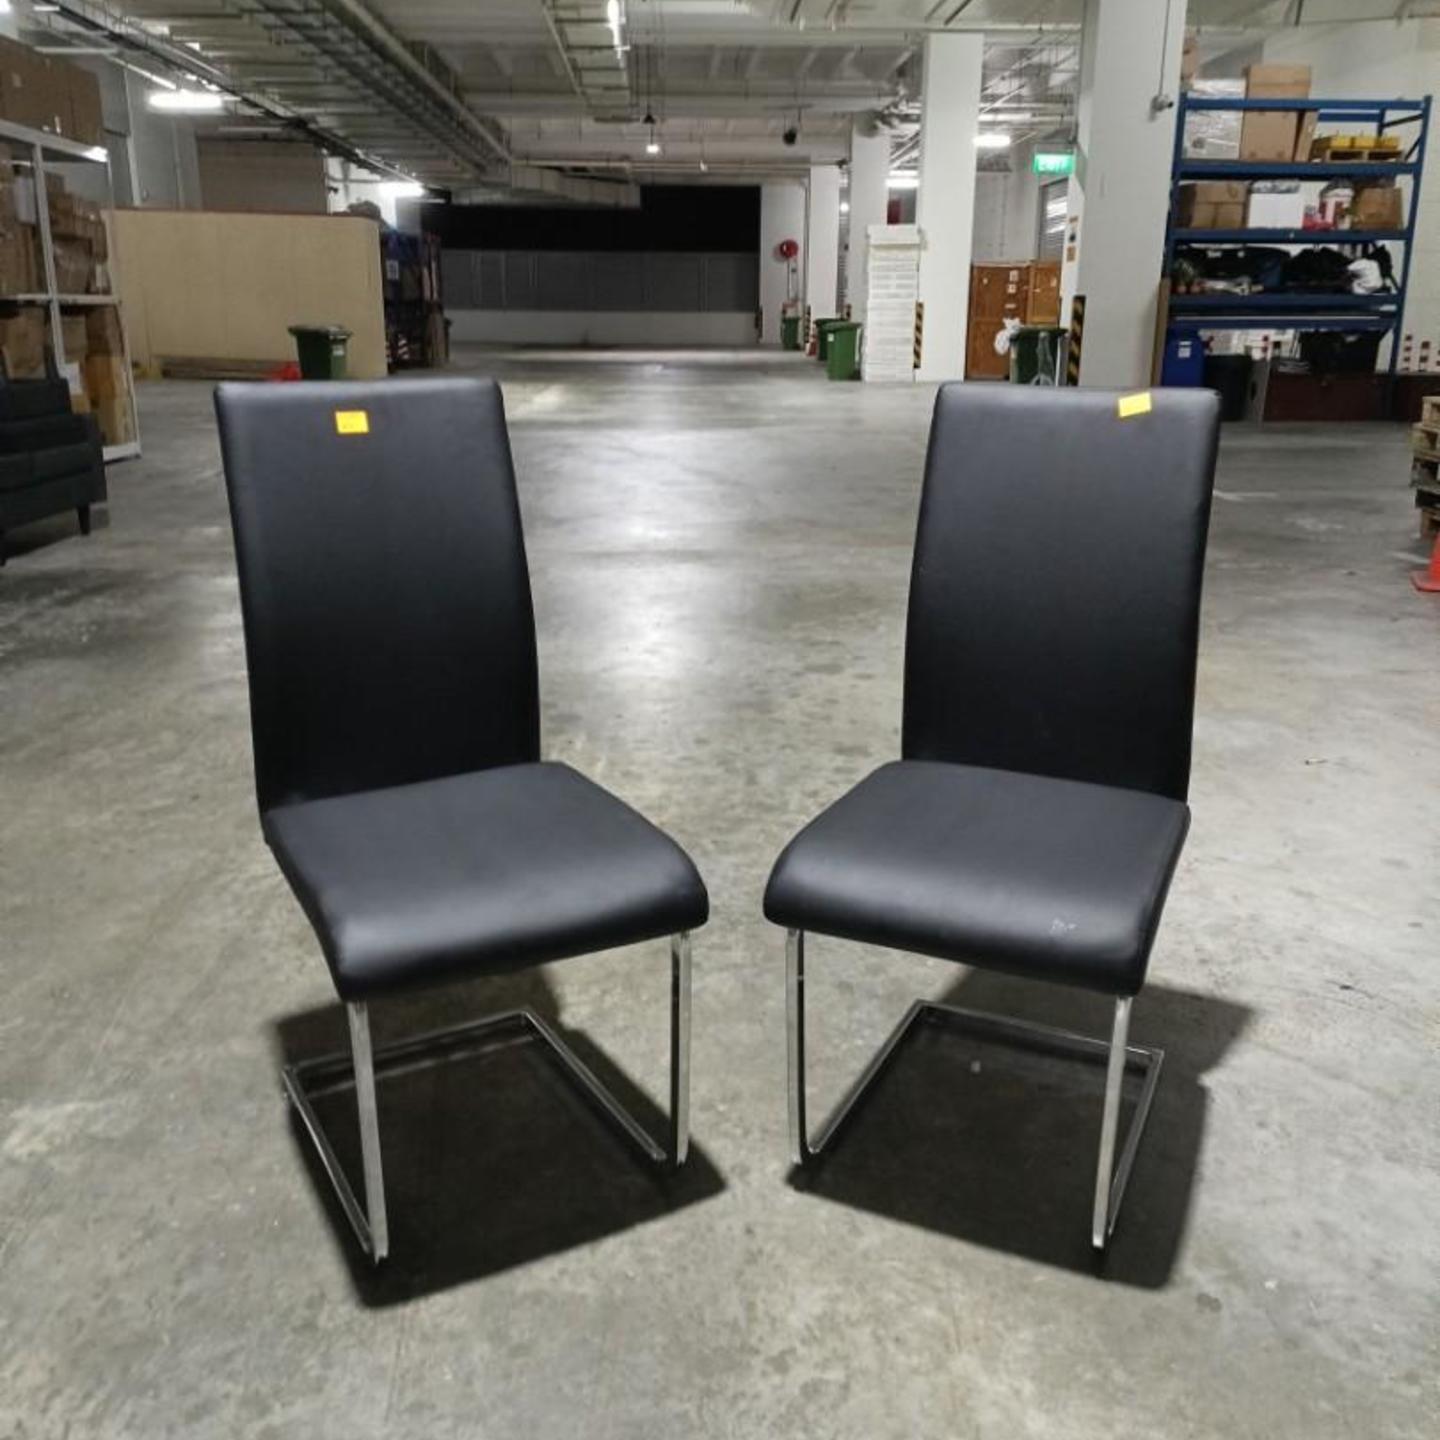 2 x JAMES Dining Chair in BLACK